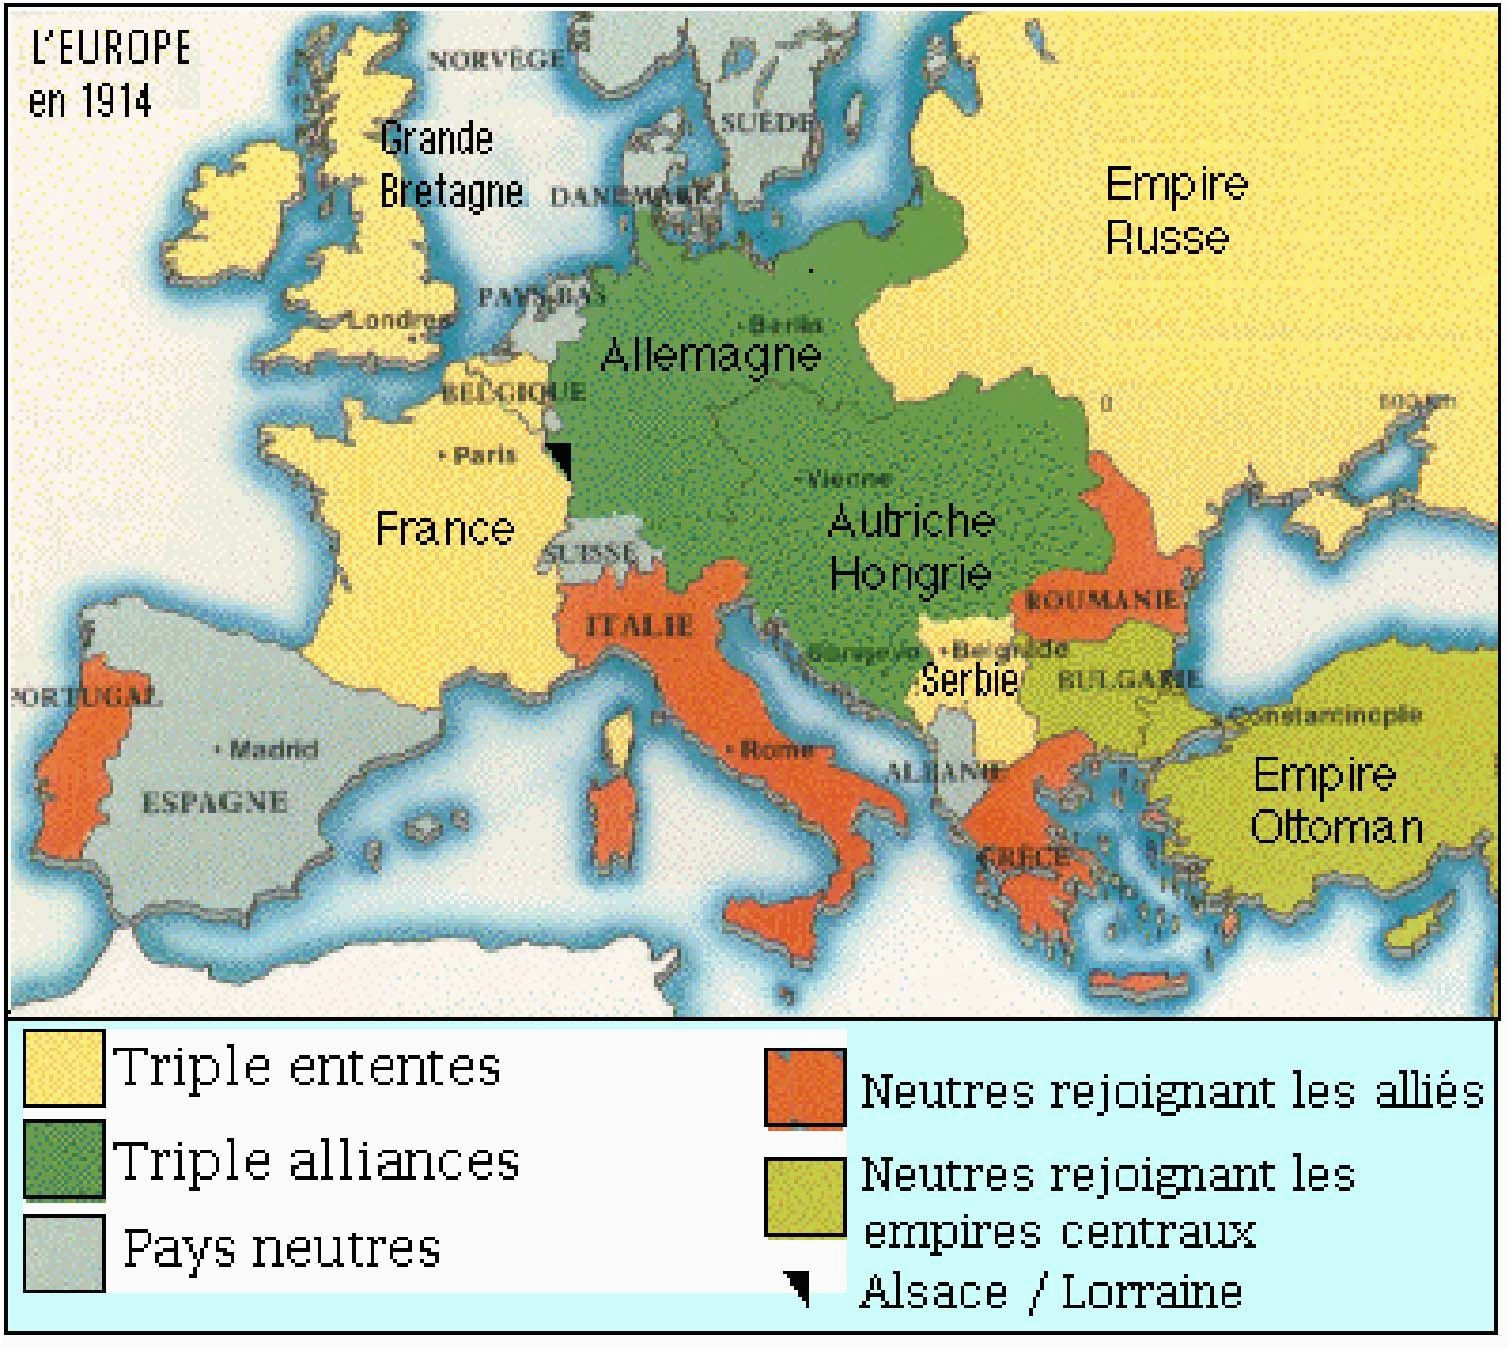 this is a map of europe in 1914 that illistrates the allied forces